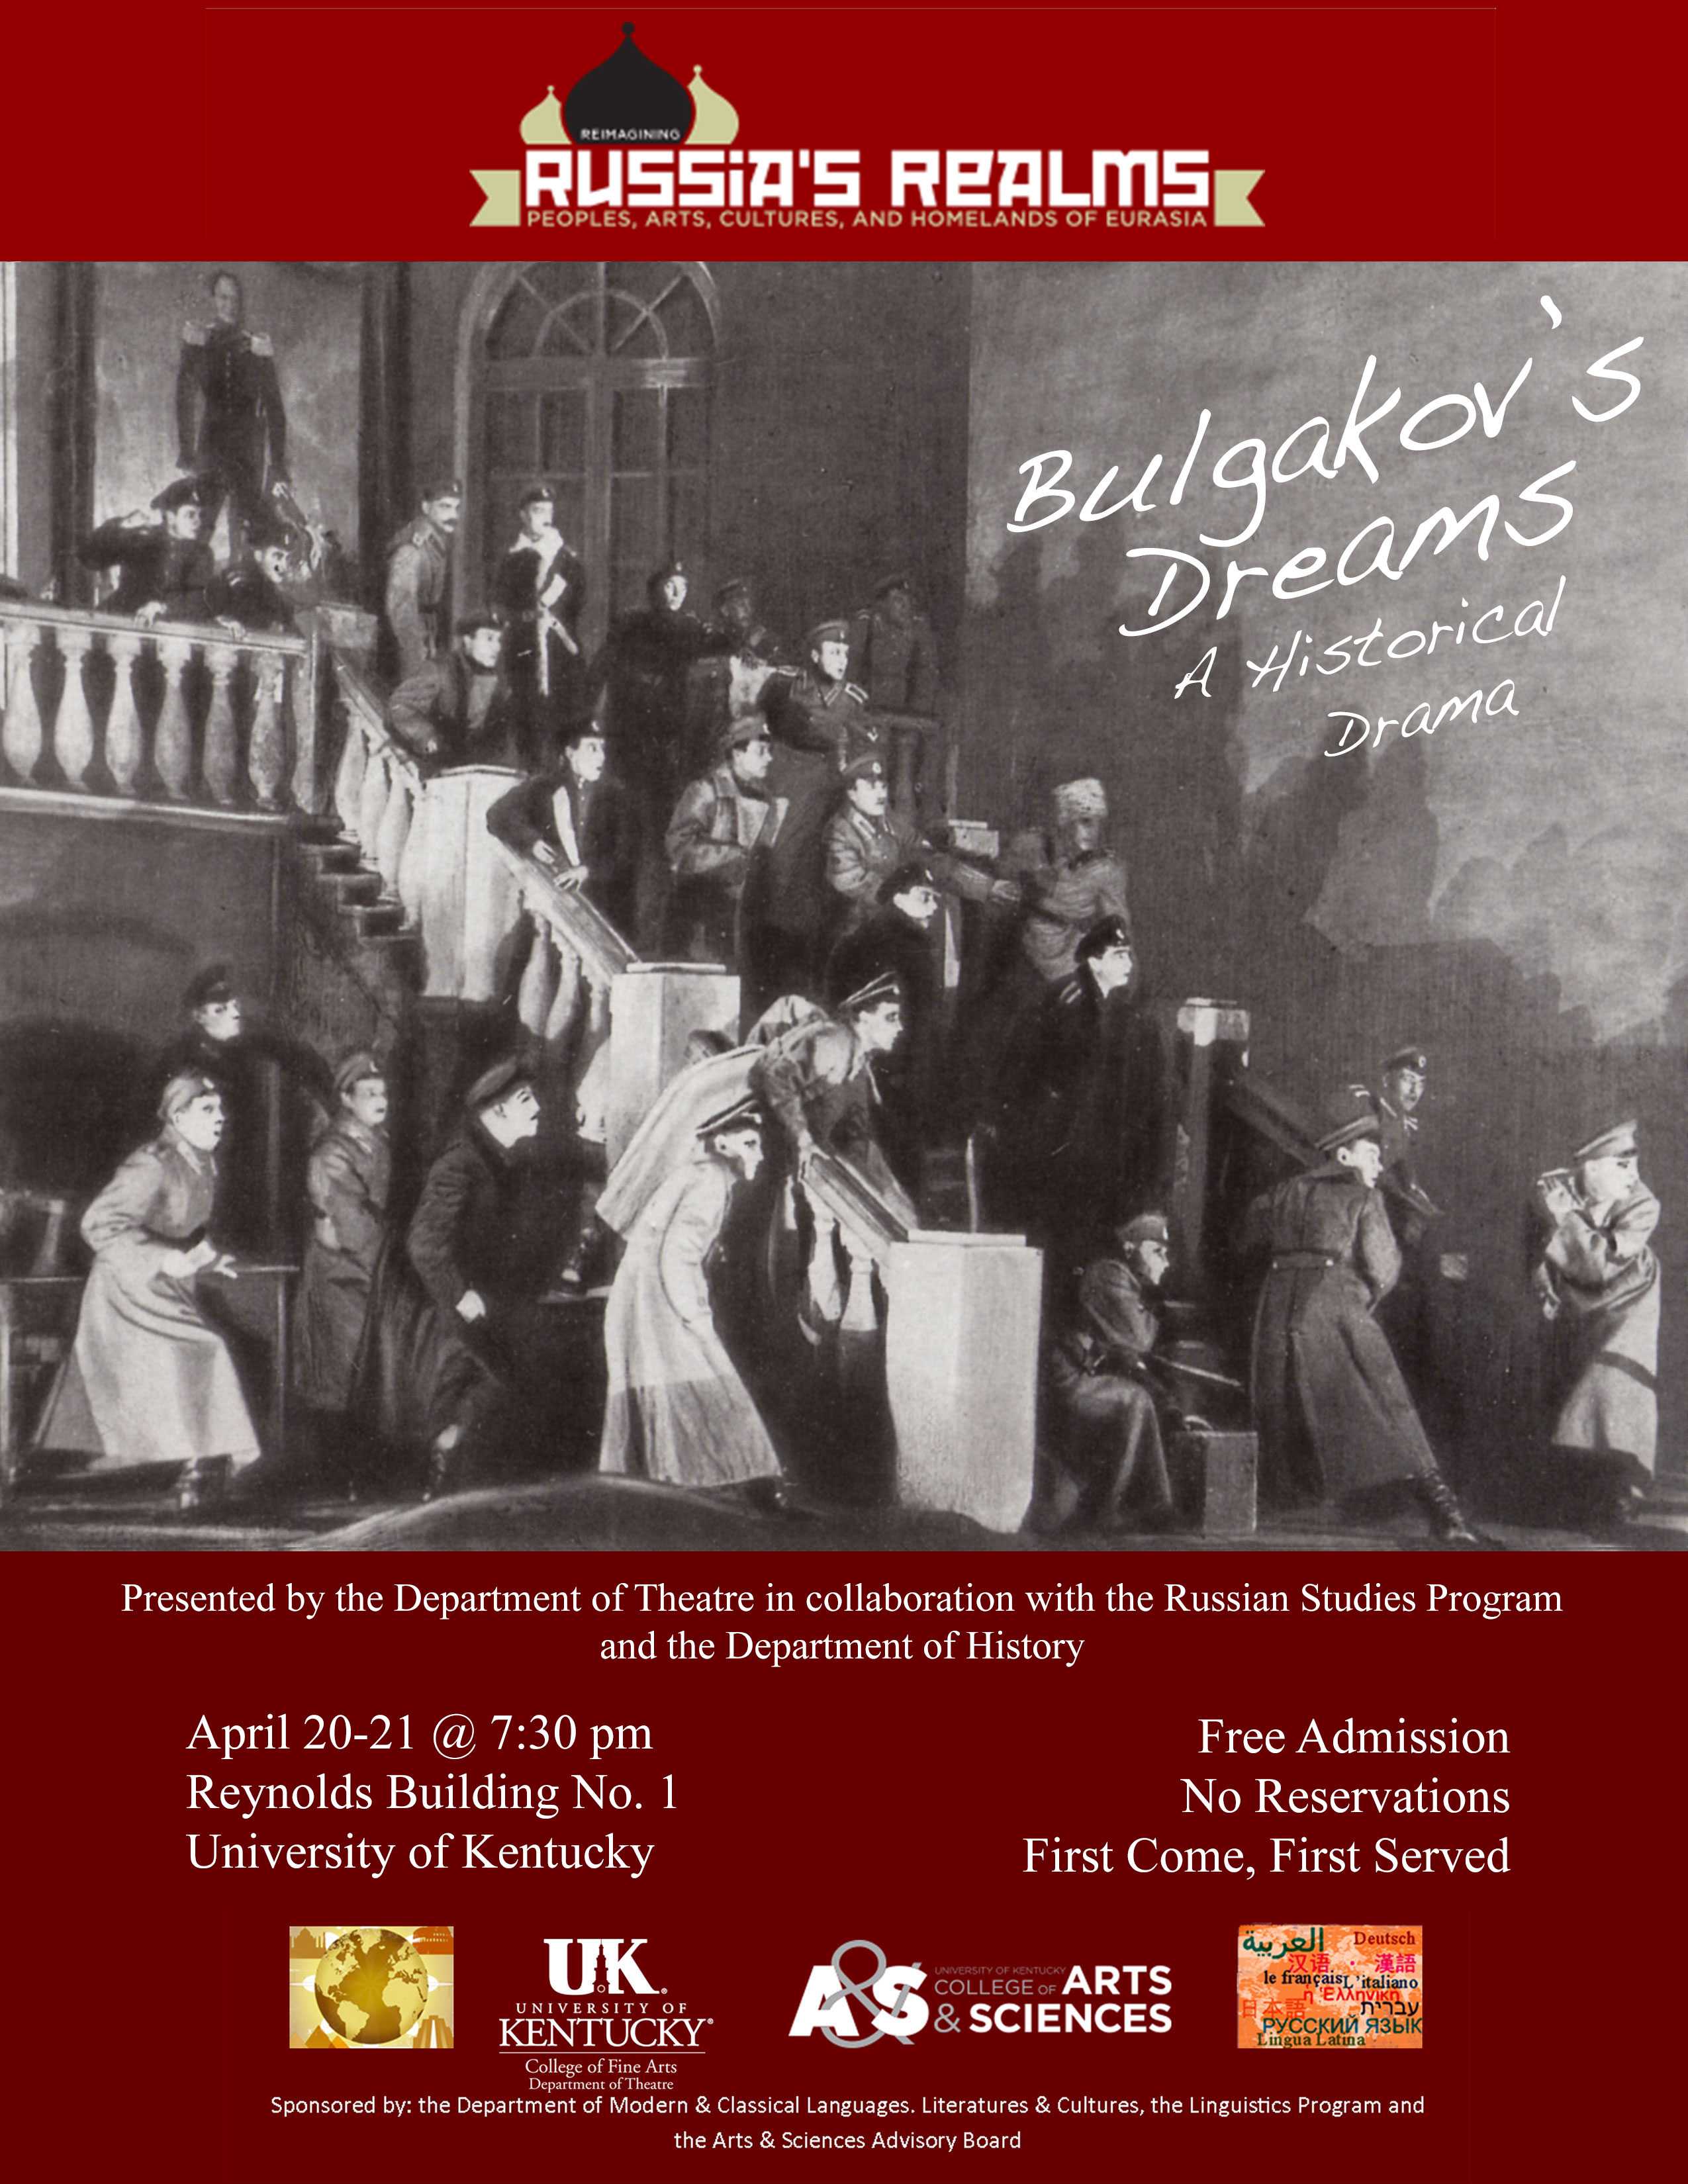 UK Department of Theatre in collaboration with UK's Russian Studies Program and the Department of History will present "Bulgakov's Dreams," a drama on the life of Soviet writer Mikhaíl Afanasyevich Bulgakov. The performance will begin 7:30 p.m. Saturday and Sunday, April 20 and 21, at Reynolds Building No. 1.